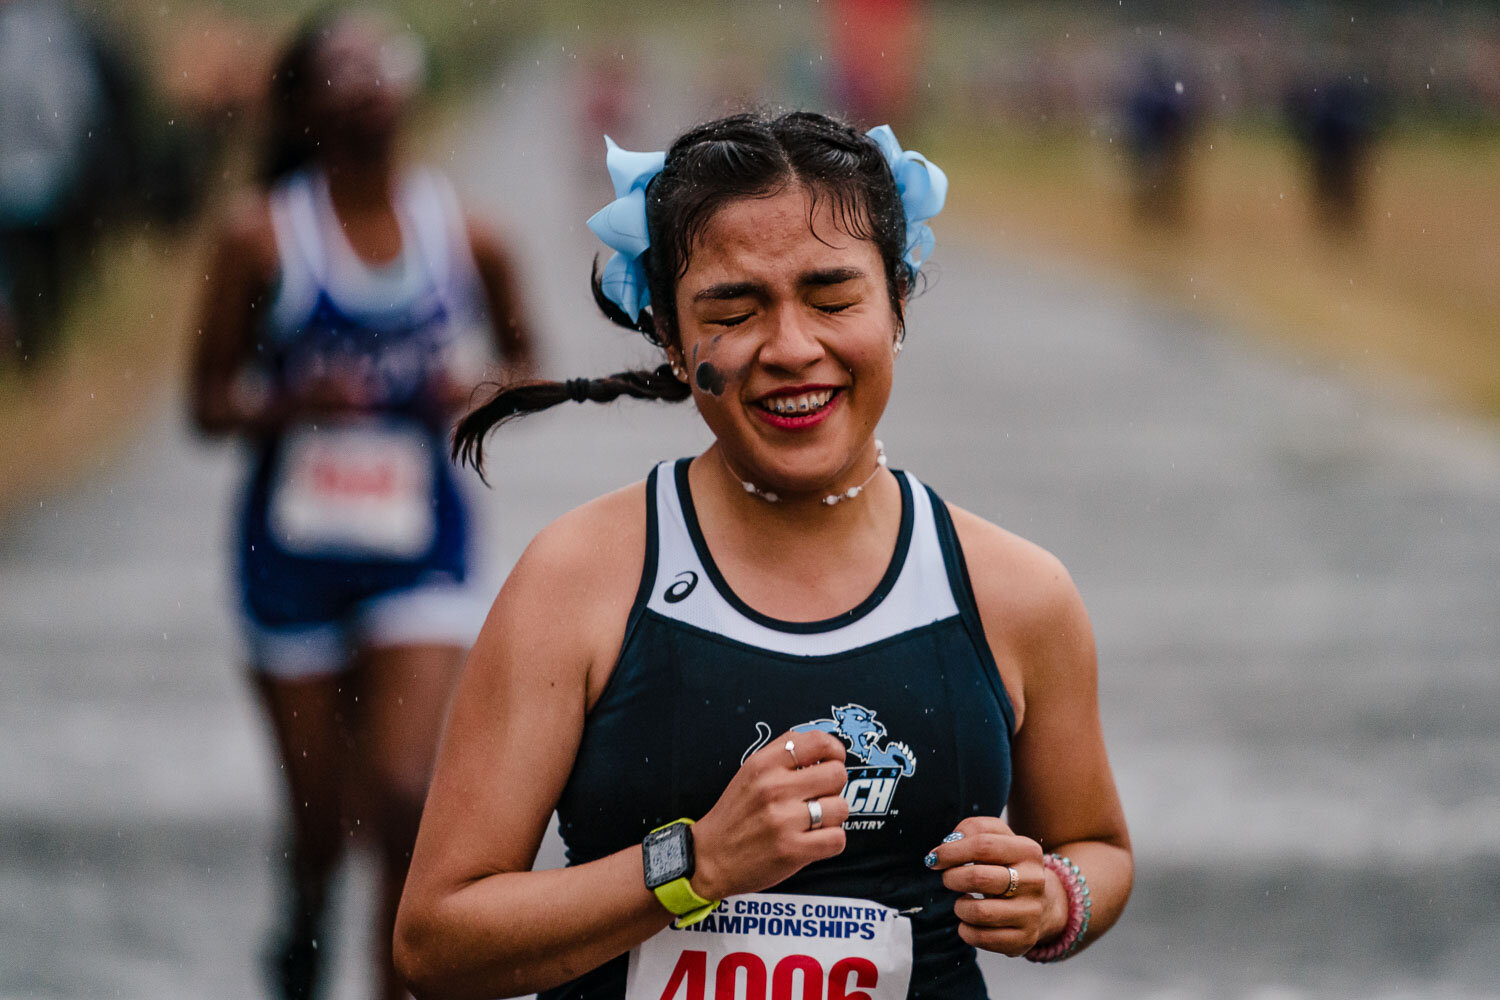 Baruch college runner crosses finish line during CUNYAC Championship race at van cortlandt park